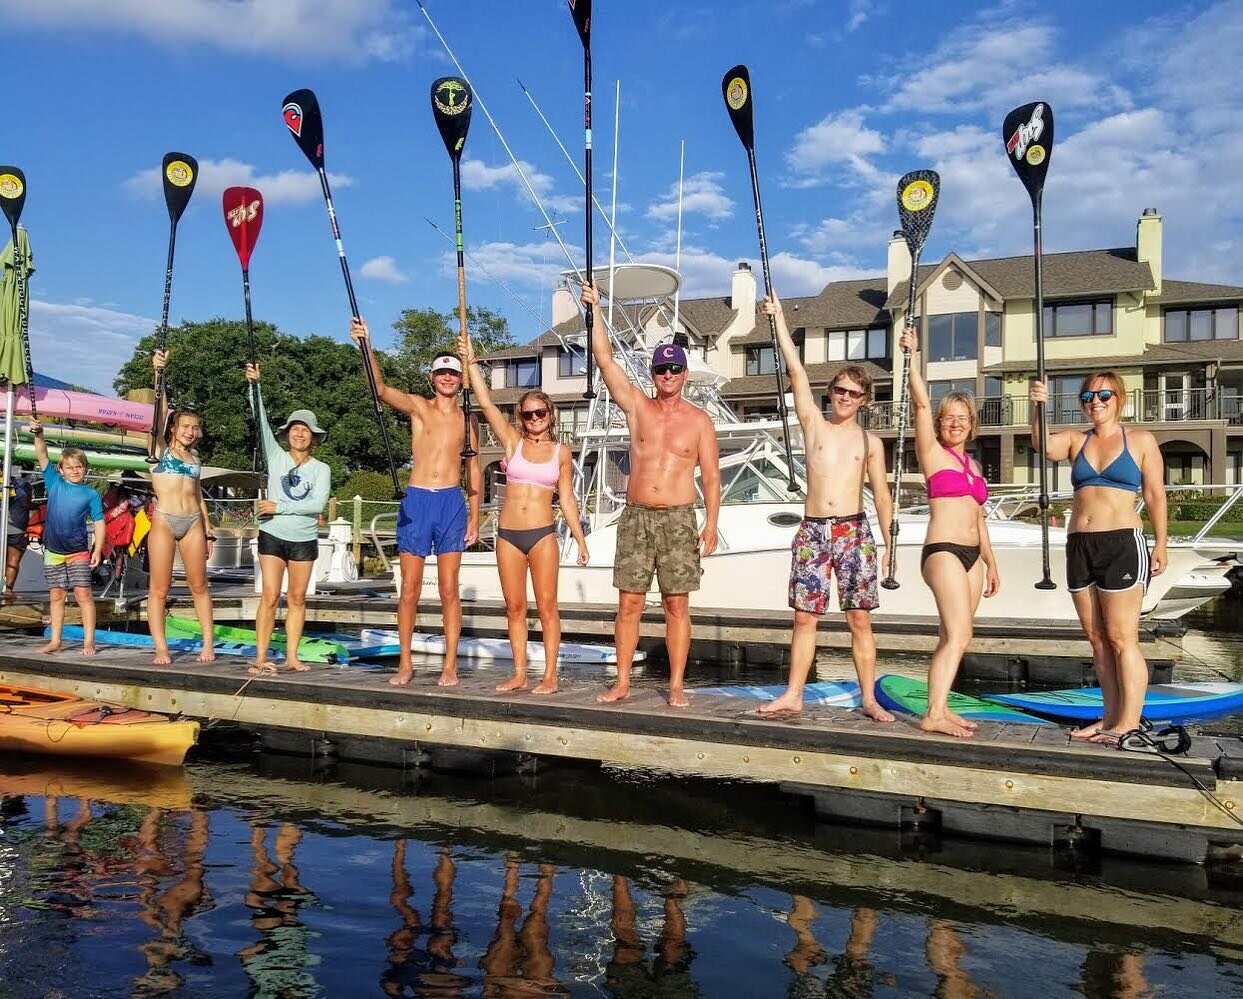 Raise your paddle if you&rsquo;re ready for the weekend!